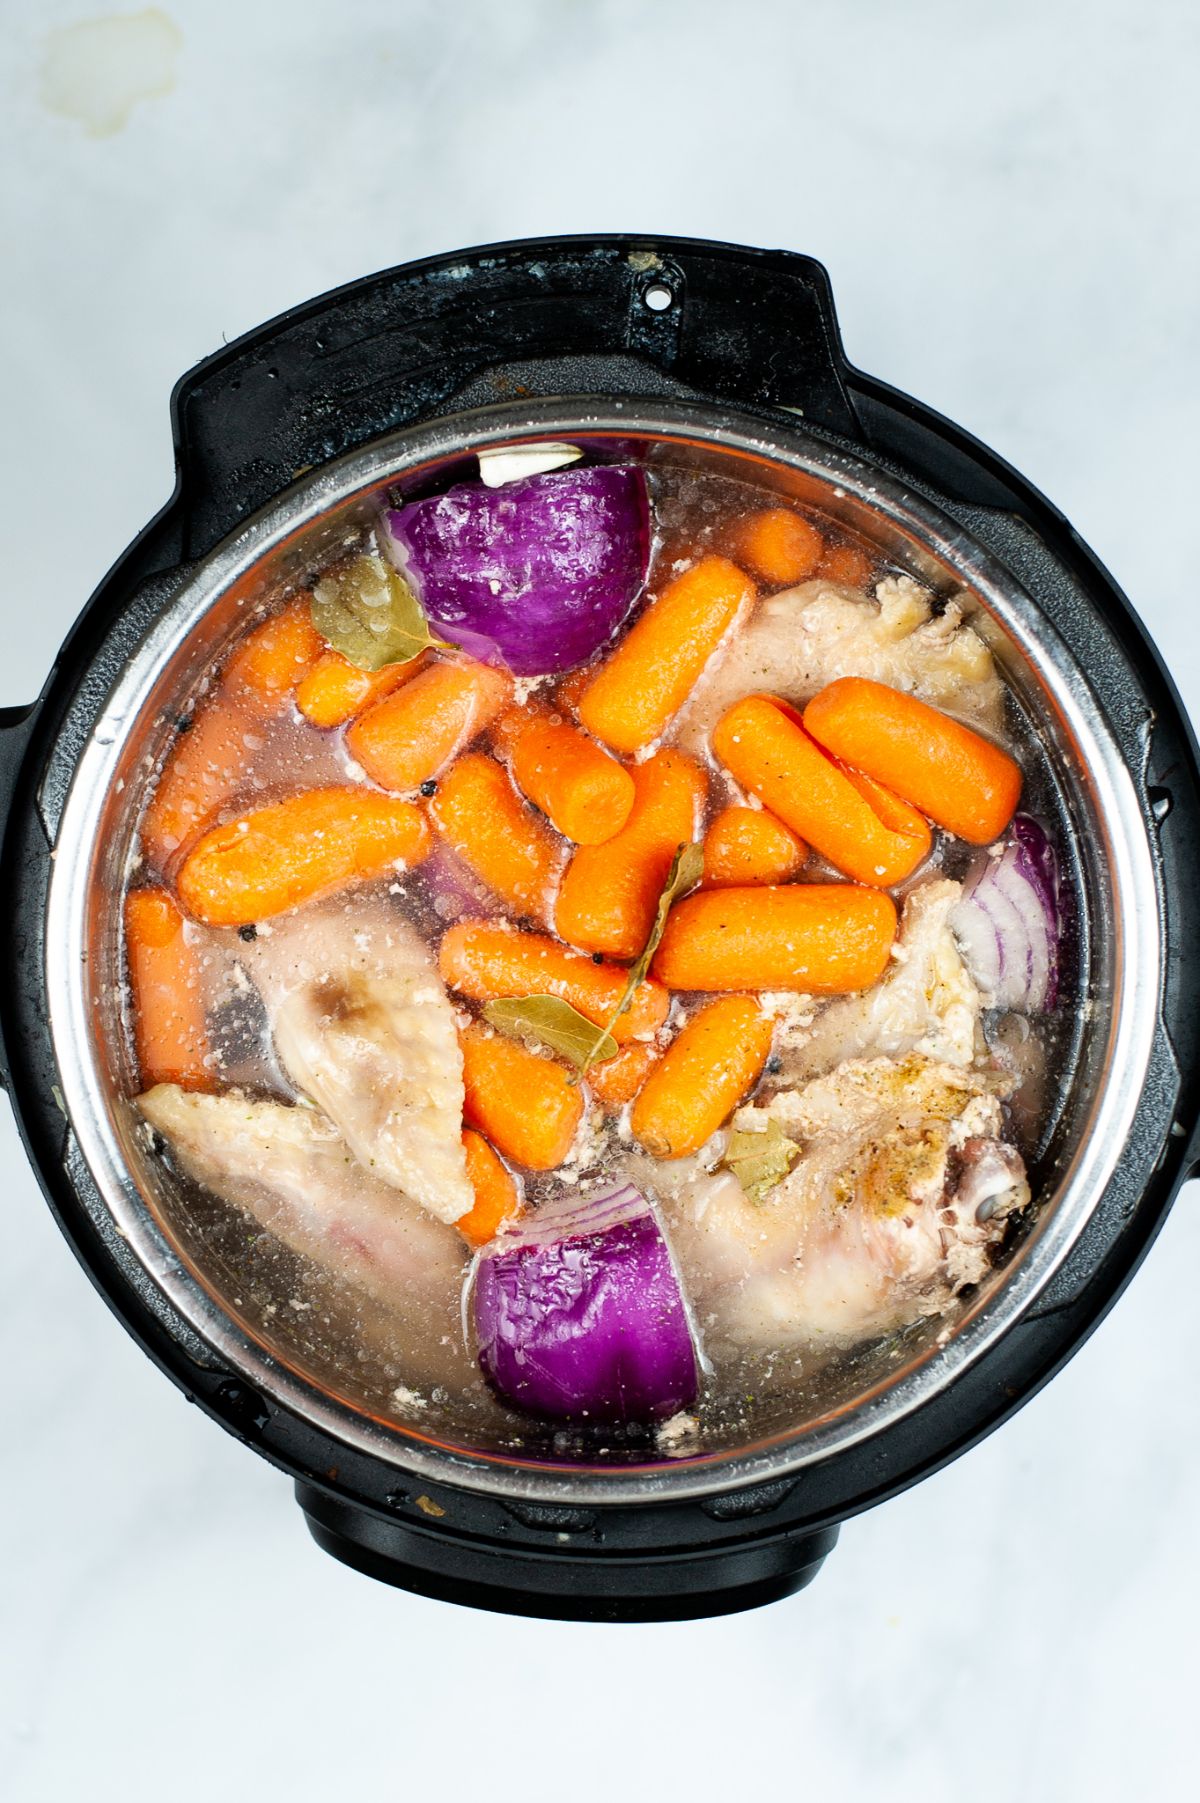 All the ingredients inside the Instant Pot